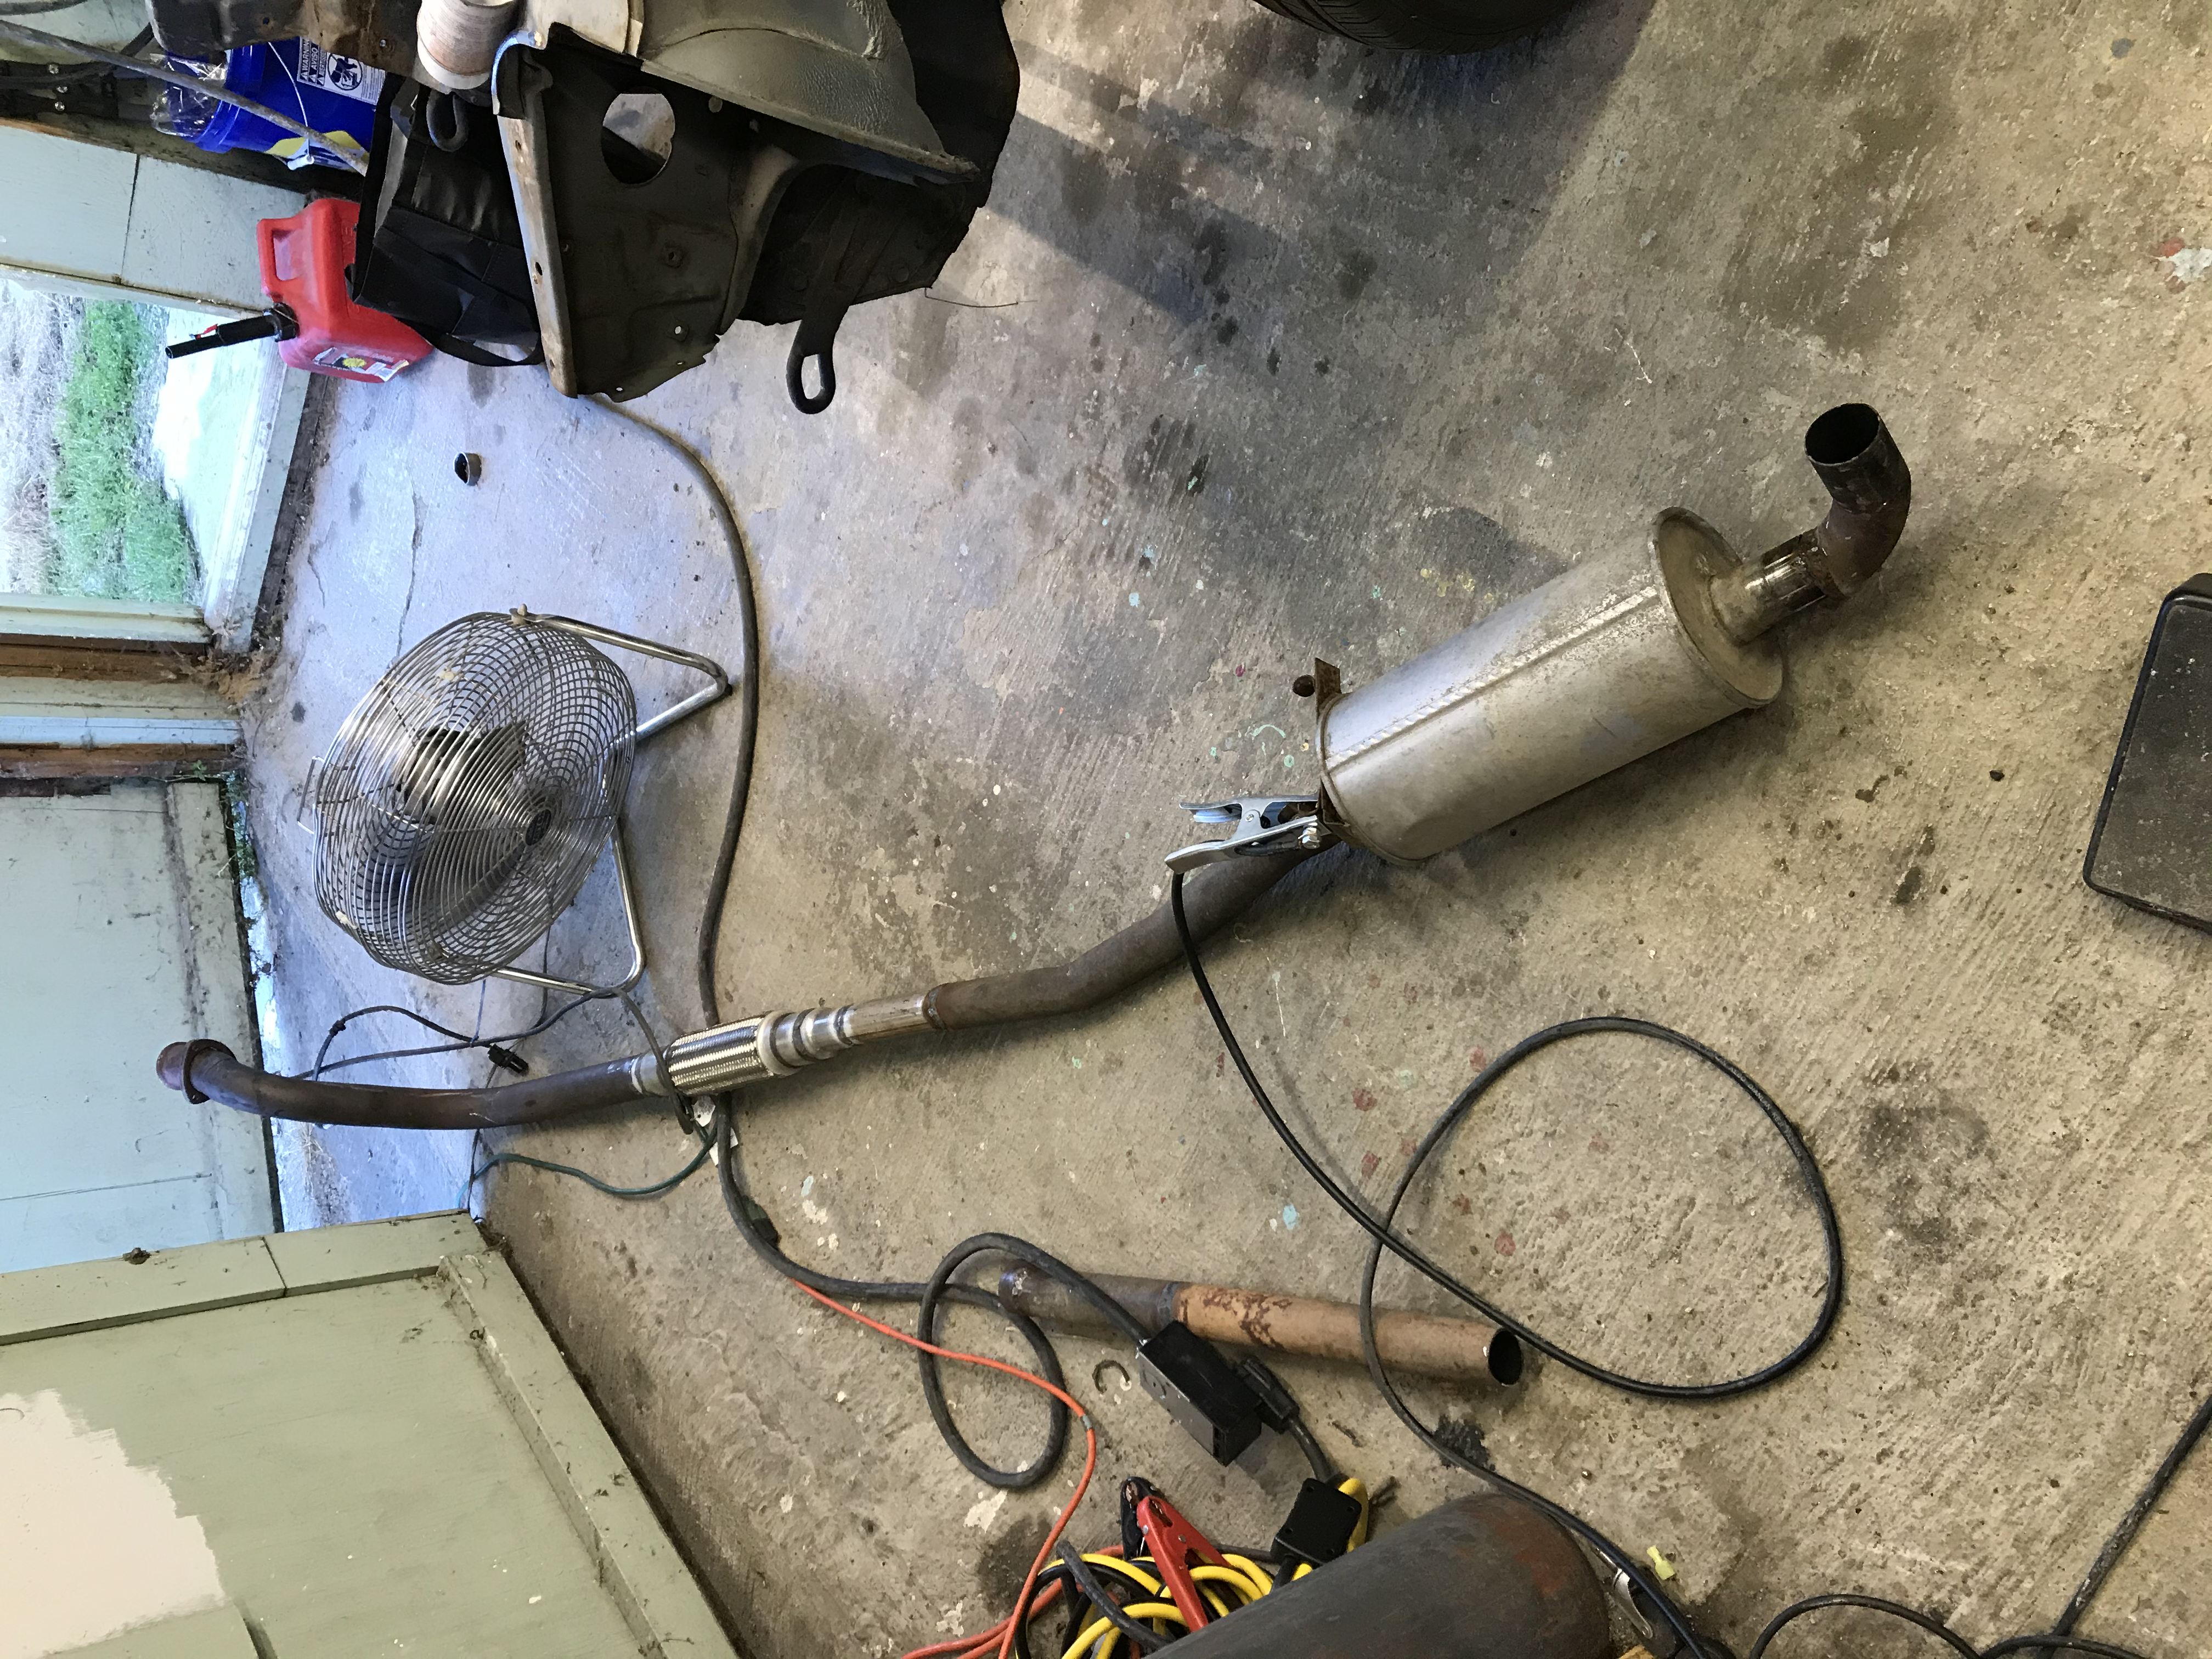 Metal exhaust tubing with a single muffler on a concrete floor with a wire fan and a welding electrode clamped to the tubing